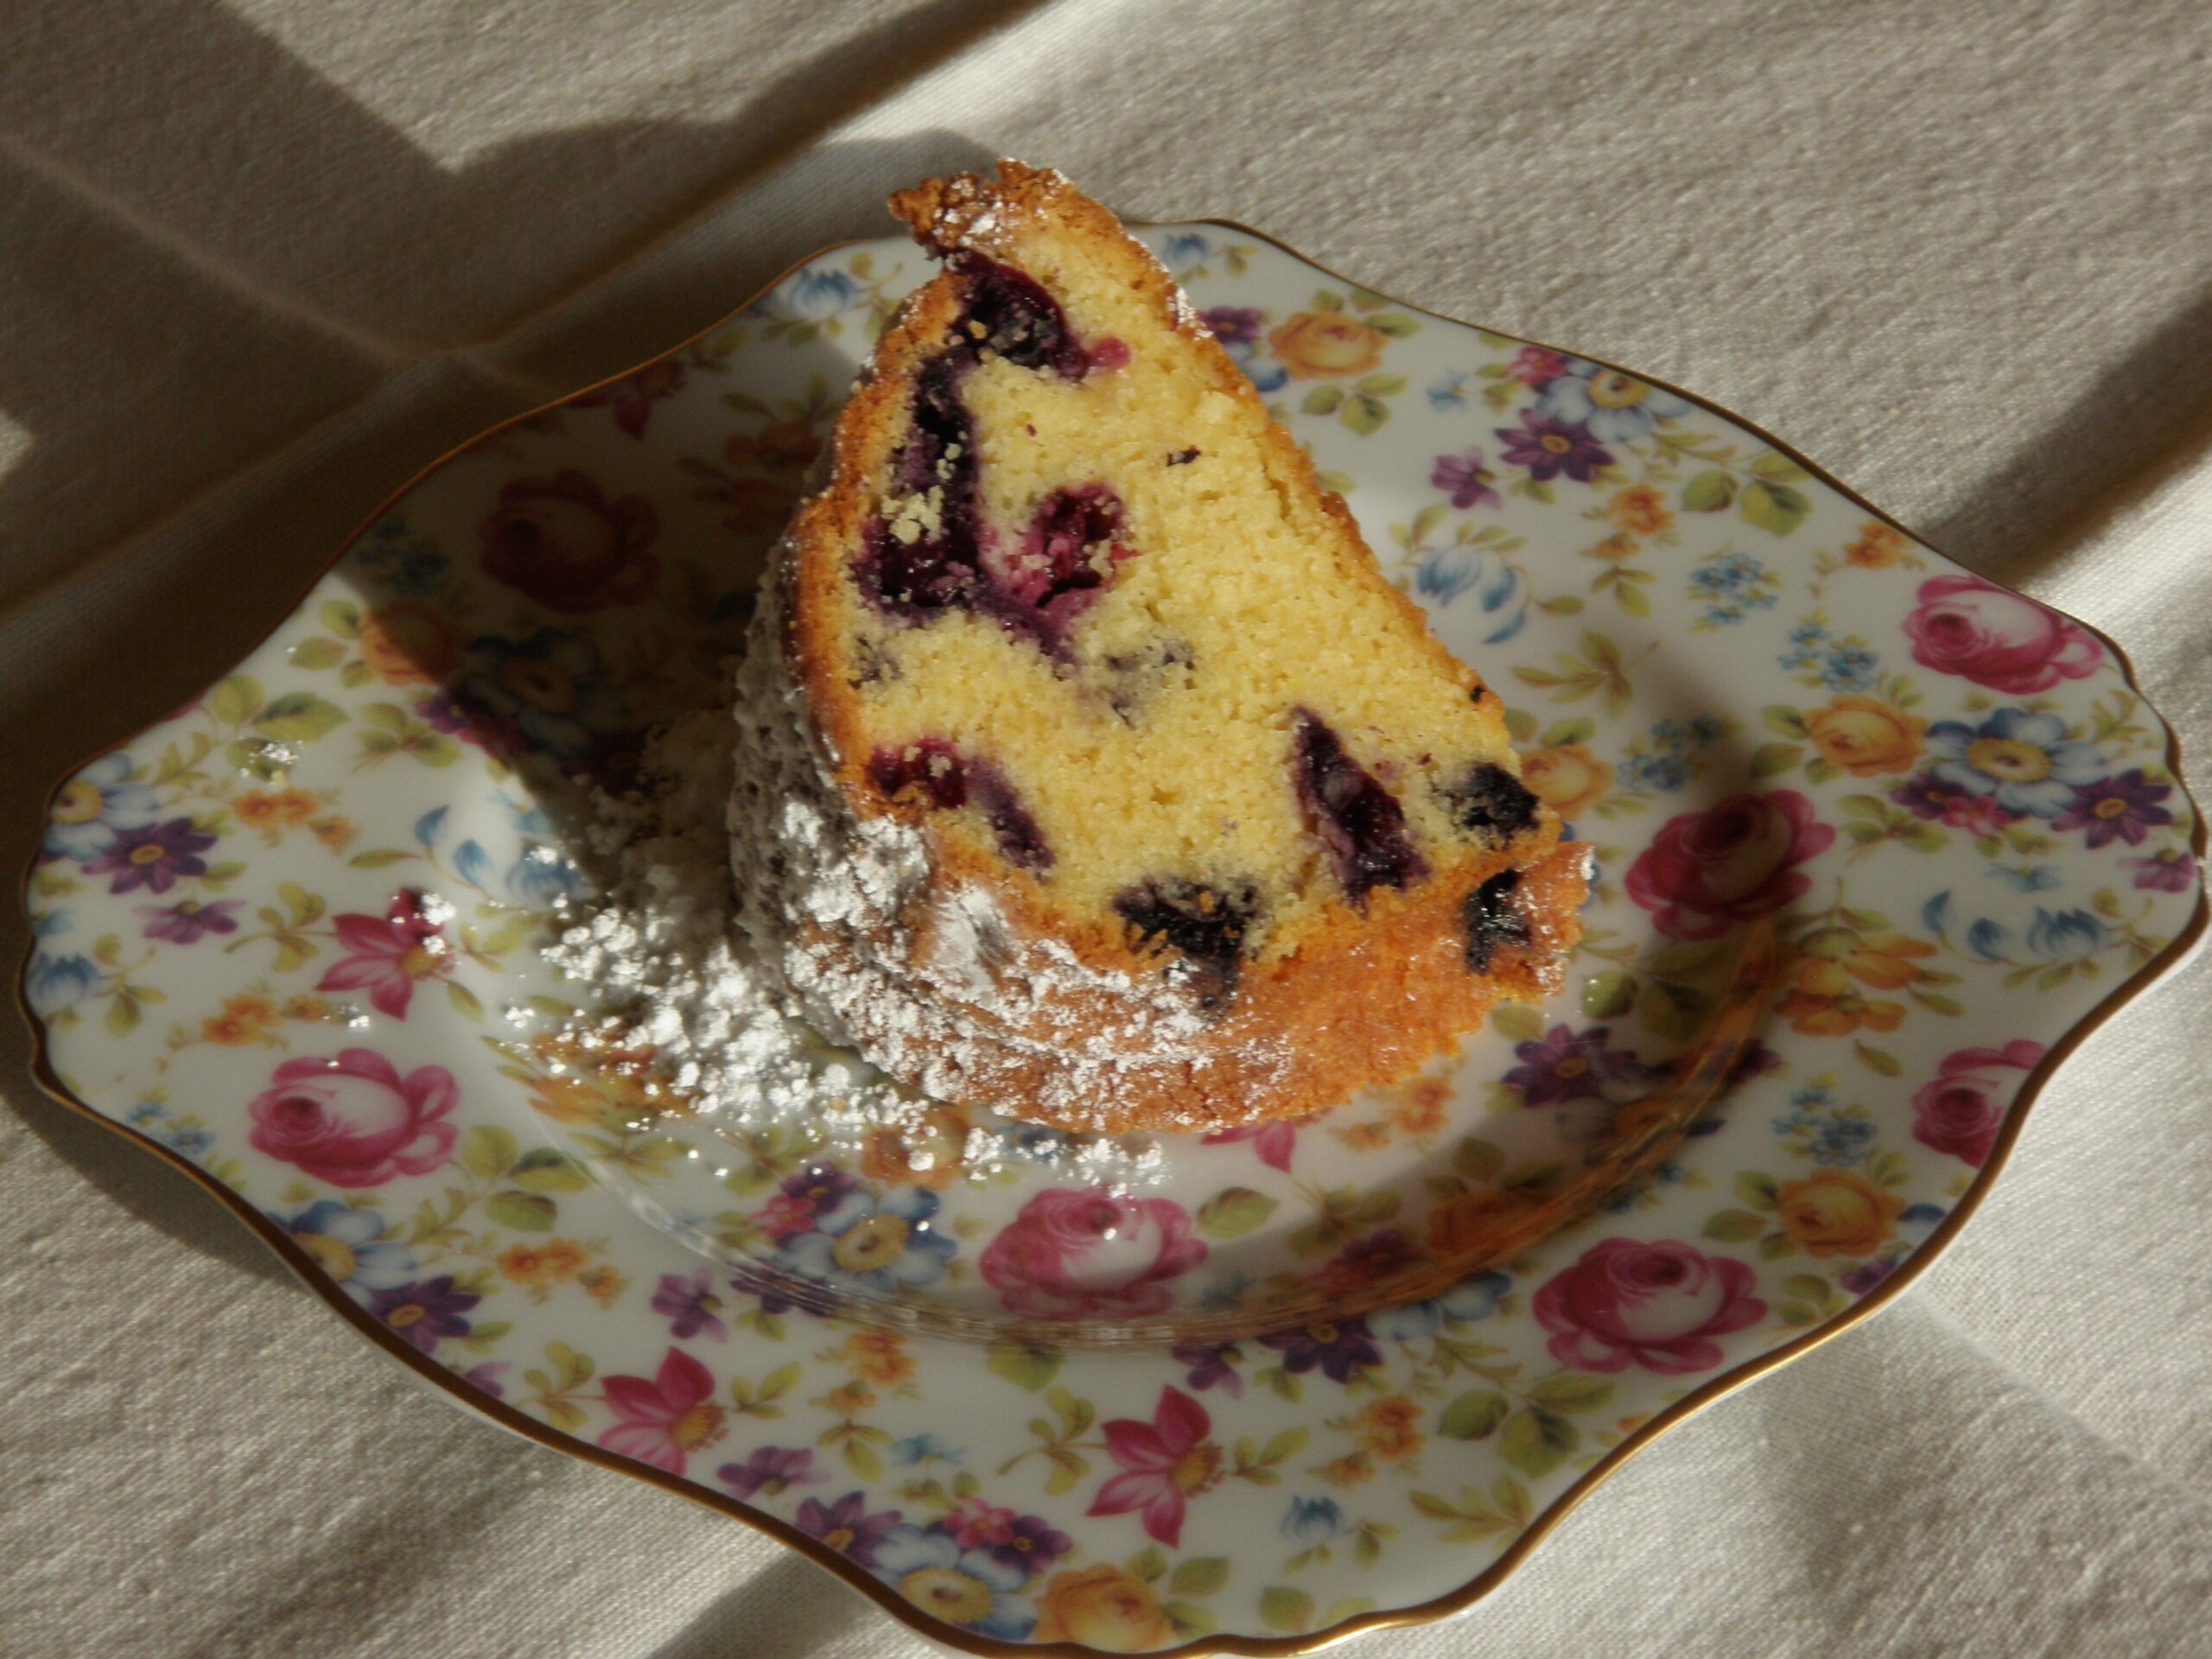  Indulge in a slice of this creamy Blueberry Cream Cheese Pound Cake.